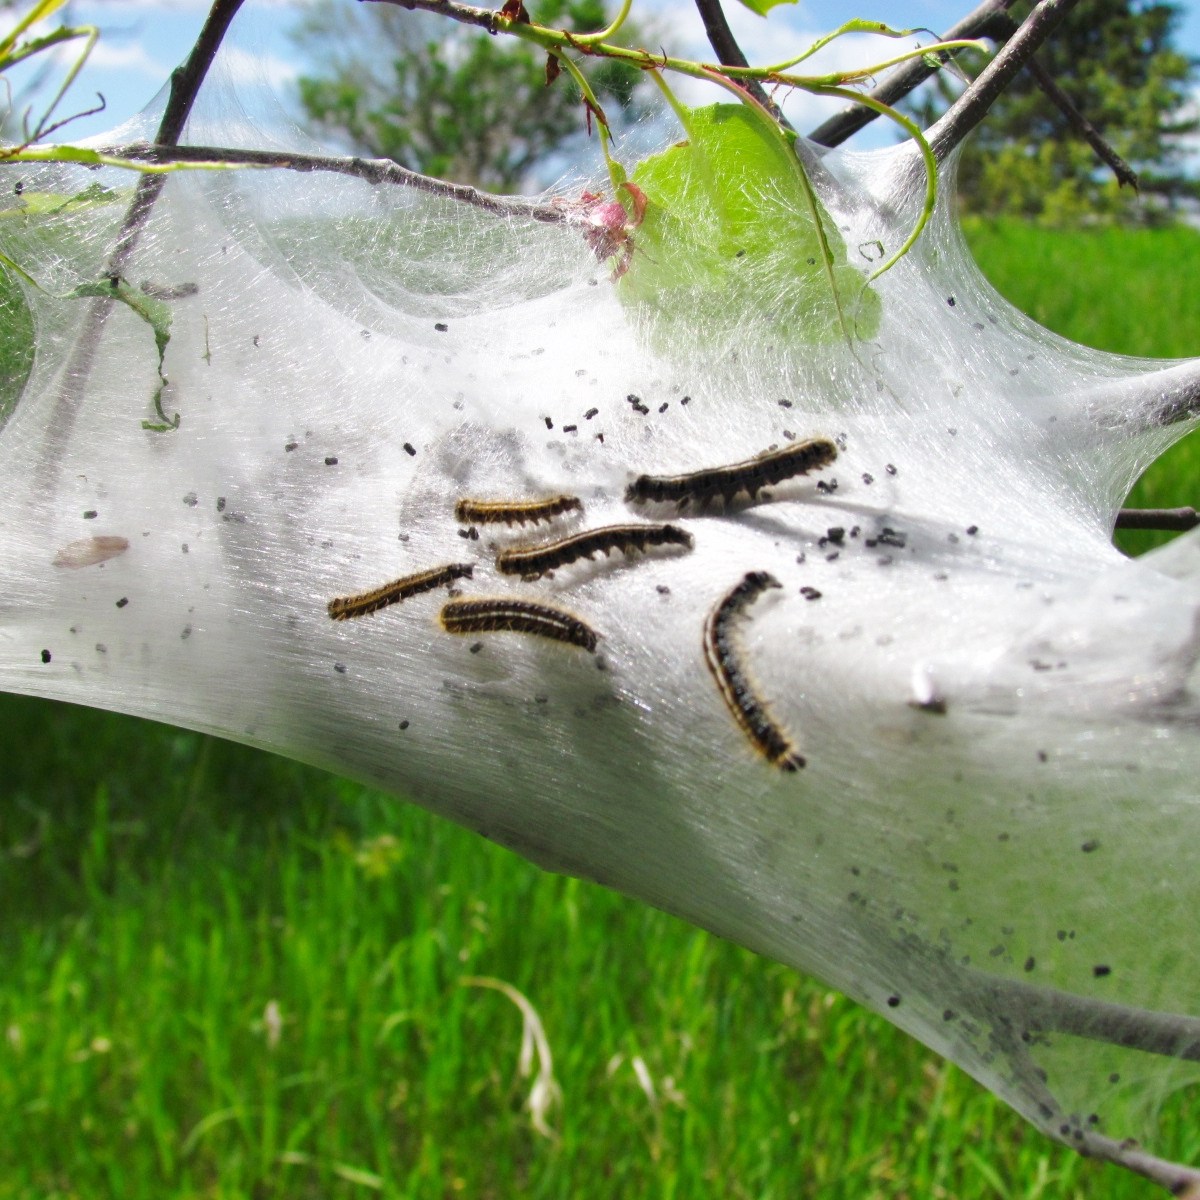 Tent caterpillars in their web